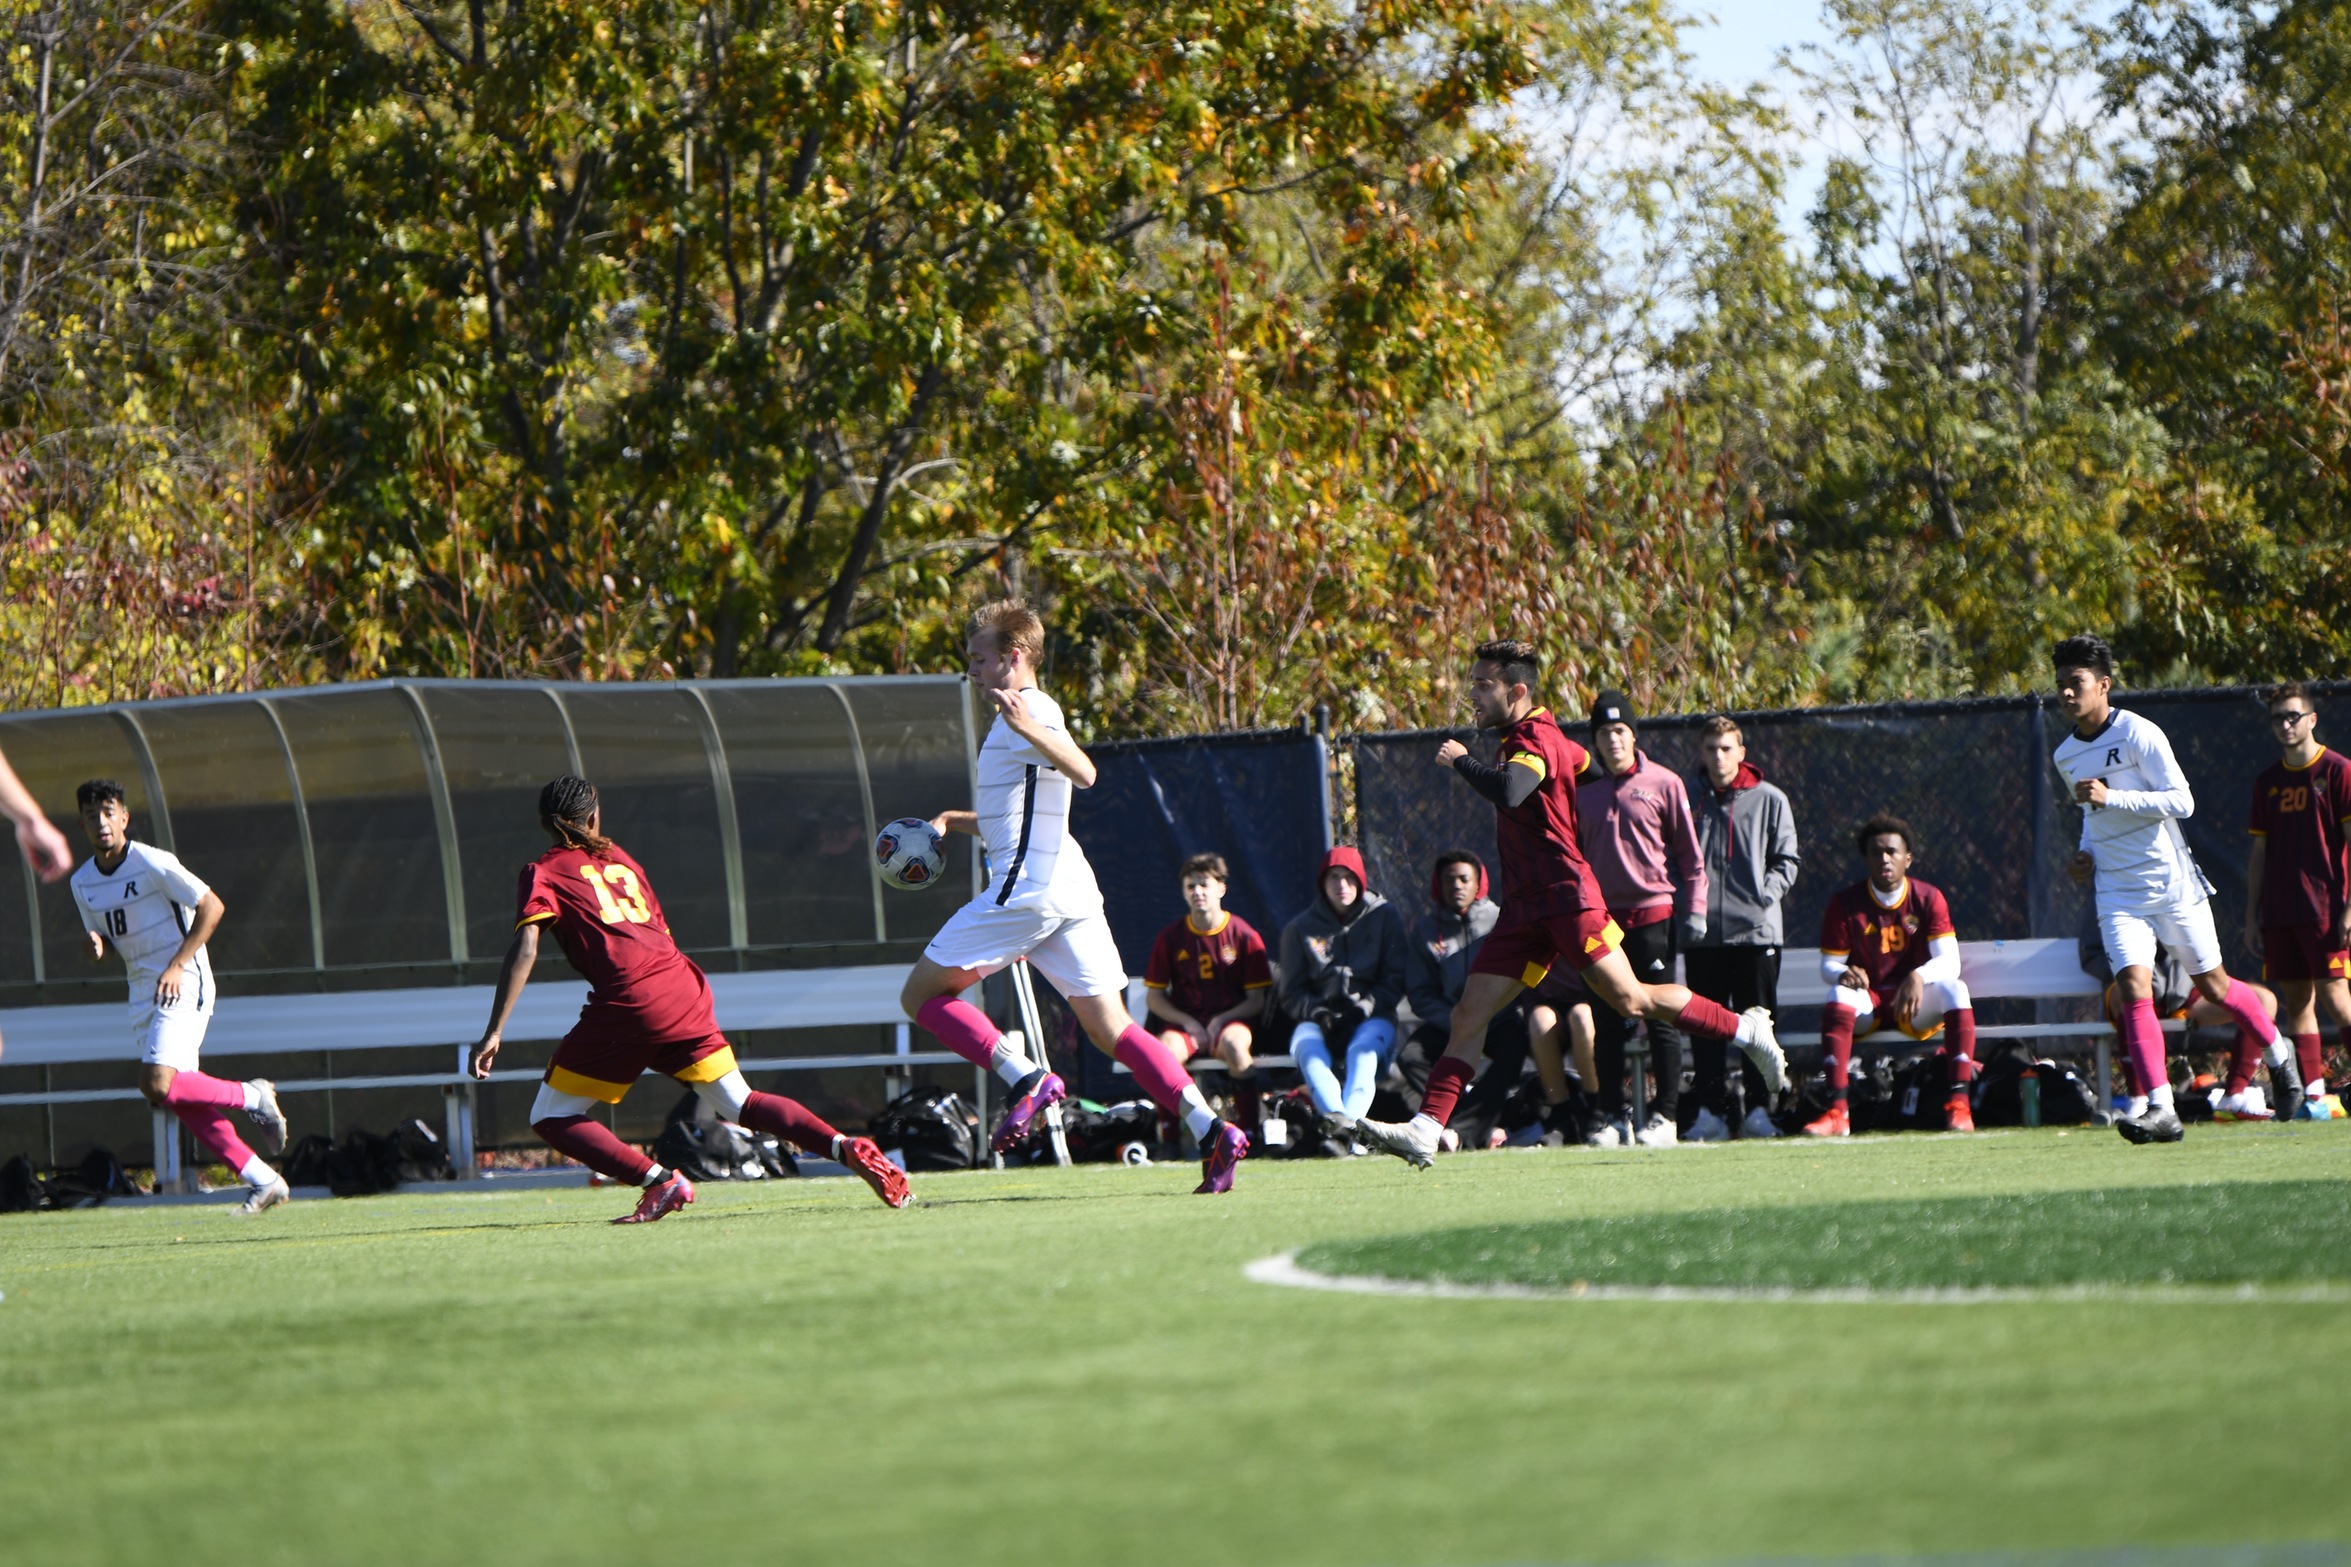 Men’s Soccer Ends in Draw With NVU-Johnson